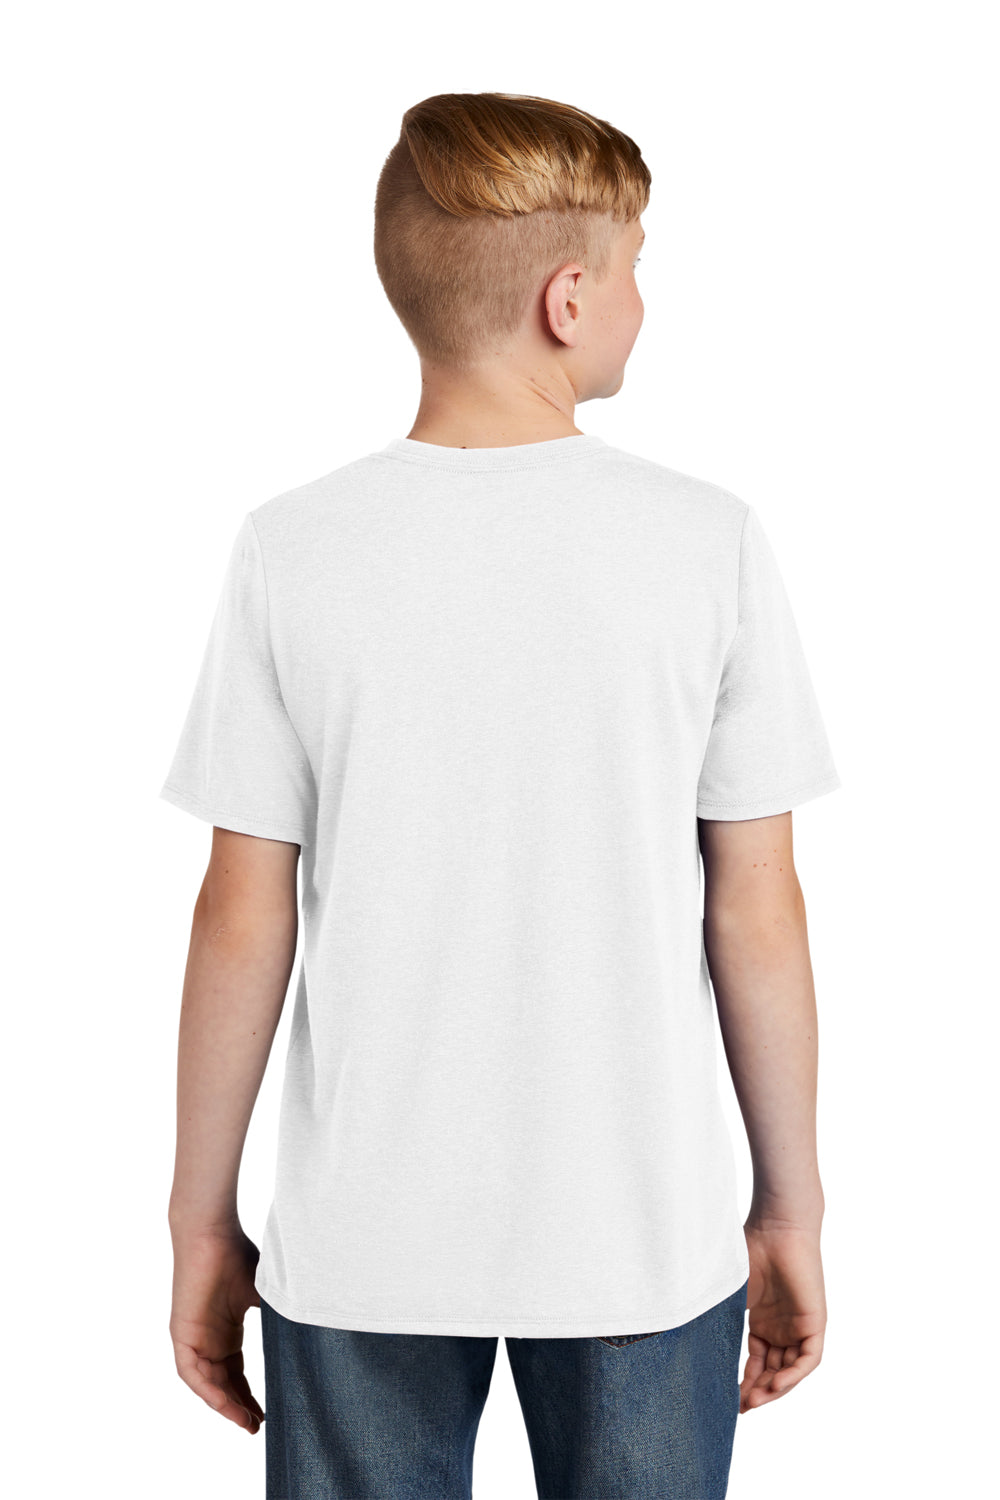 District DT130Y Youth Perfect Tri Short Sleeve Crewneck T-Shirt White Back